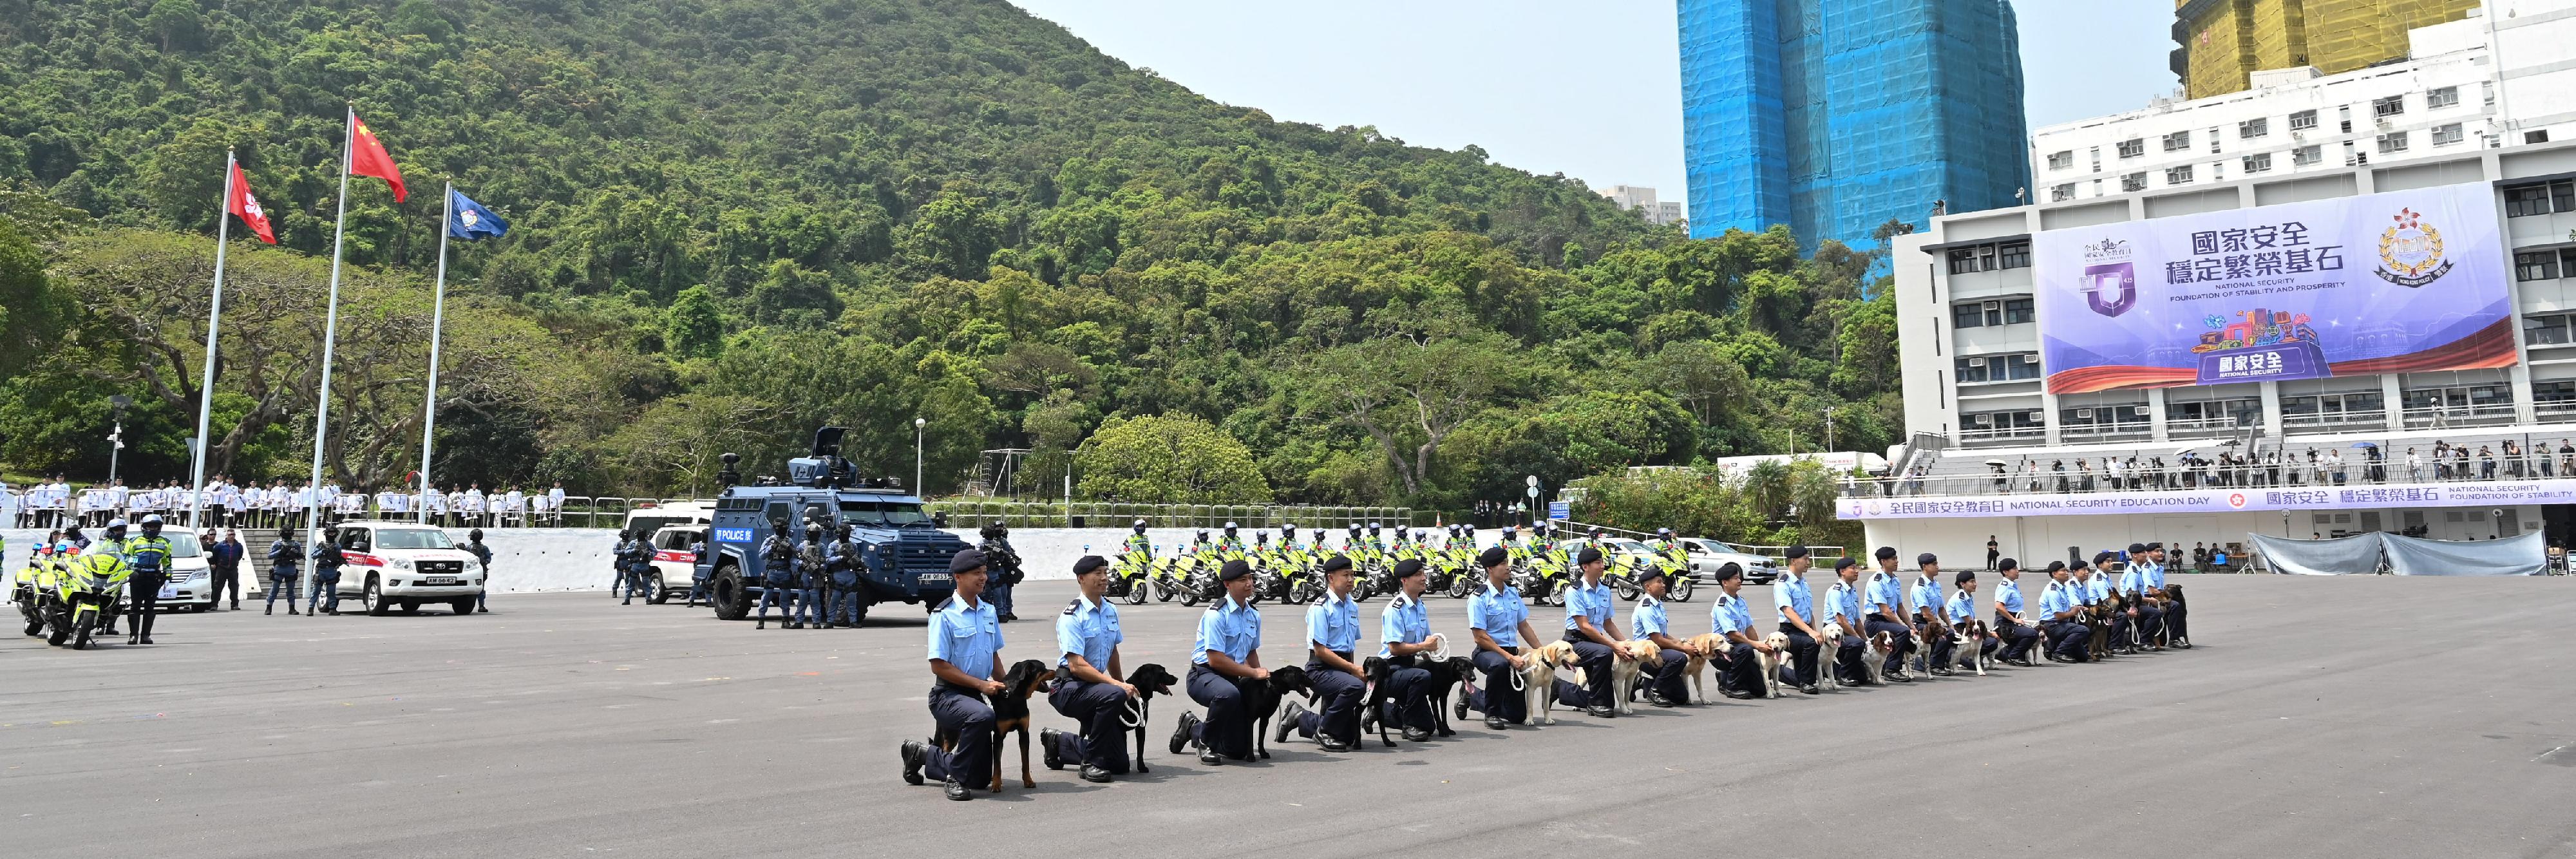 The Police Force held an open day in support of the National Security Education Day at Hong Kong Police College today (April 15). Photo shows the Hong Kong Police Band, Force Escort Group, Police Dog Unit and Counter Terrorism Response Unit participating in the grand show.